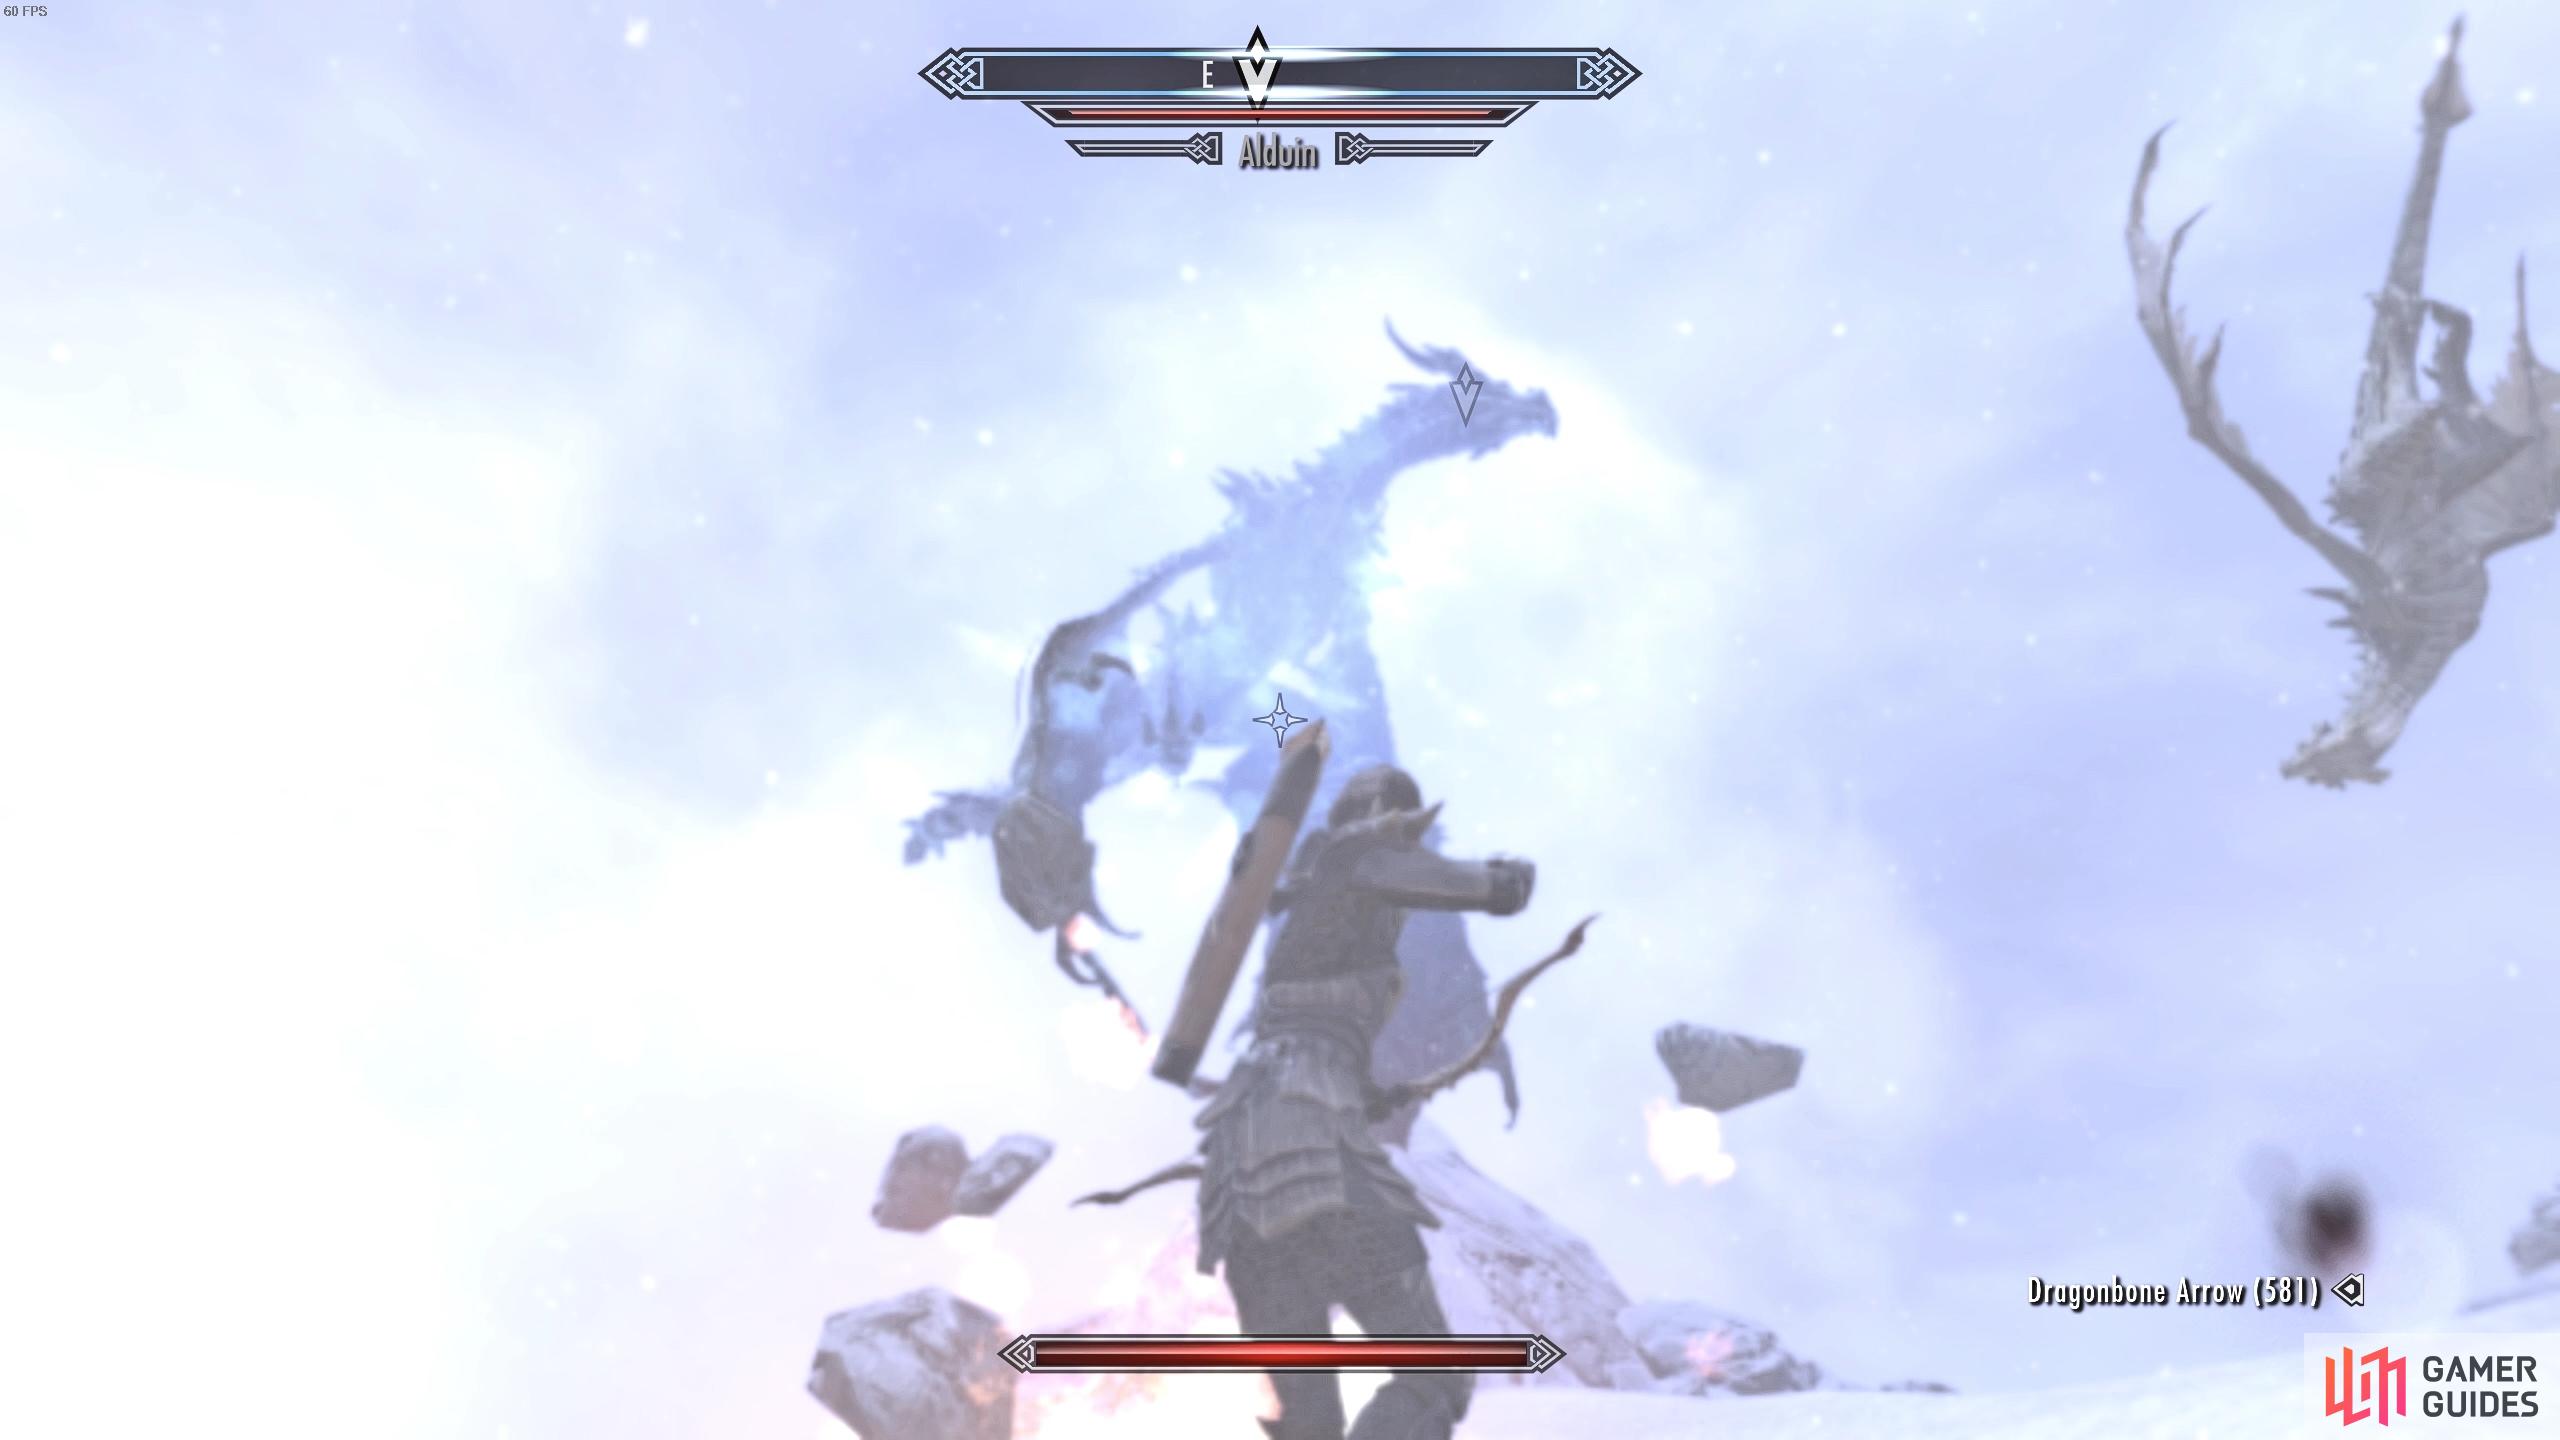 Wait for Alduin to stop and hover, then use Dragonrend to force him down.